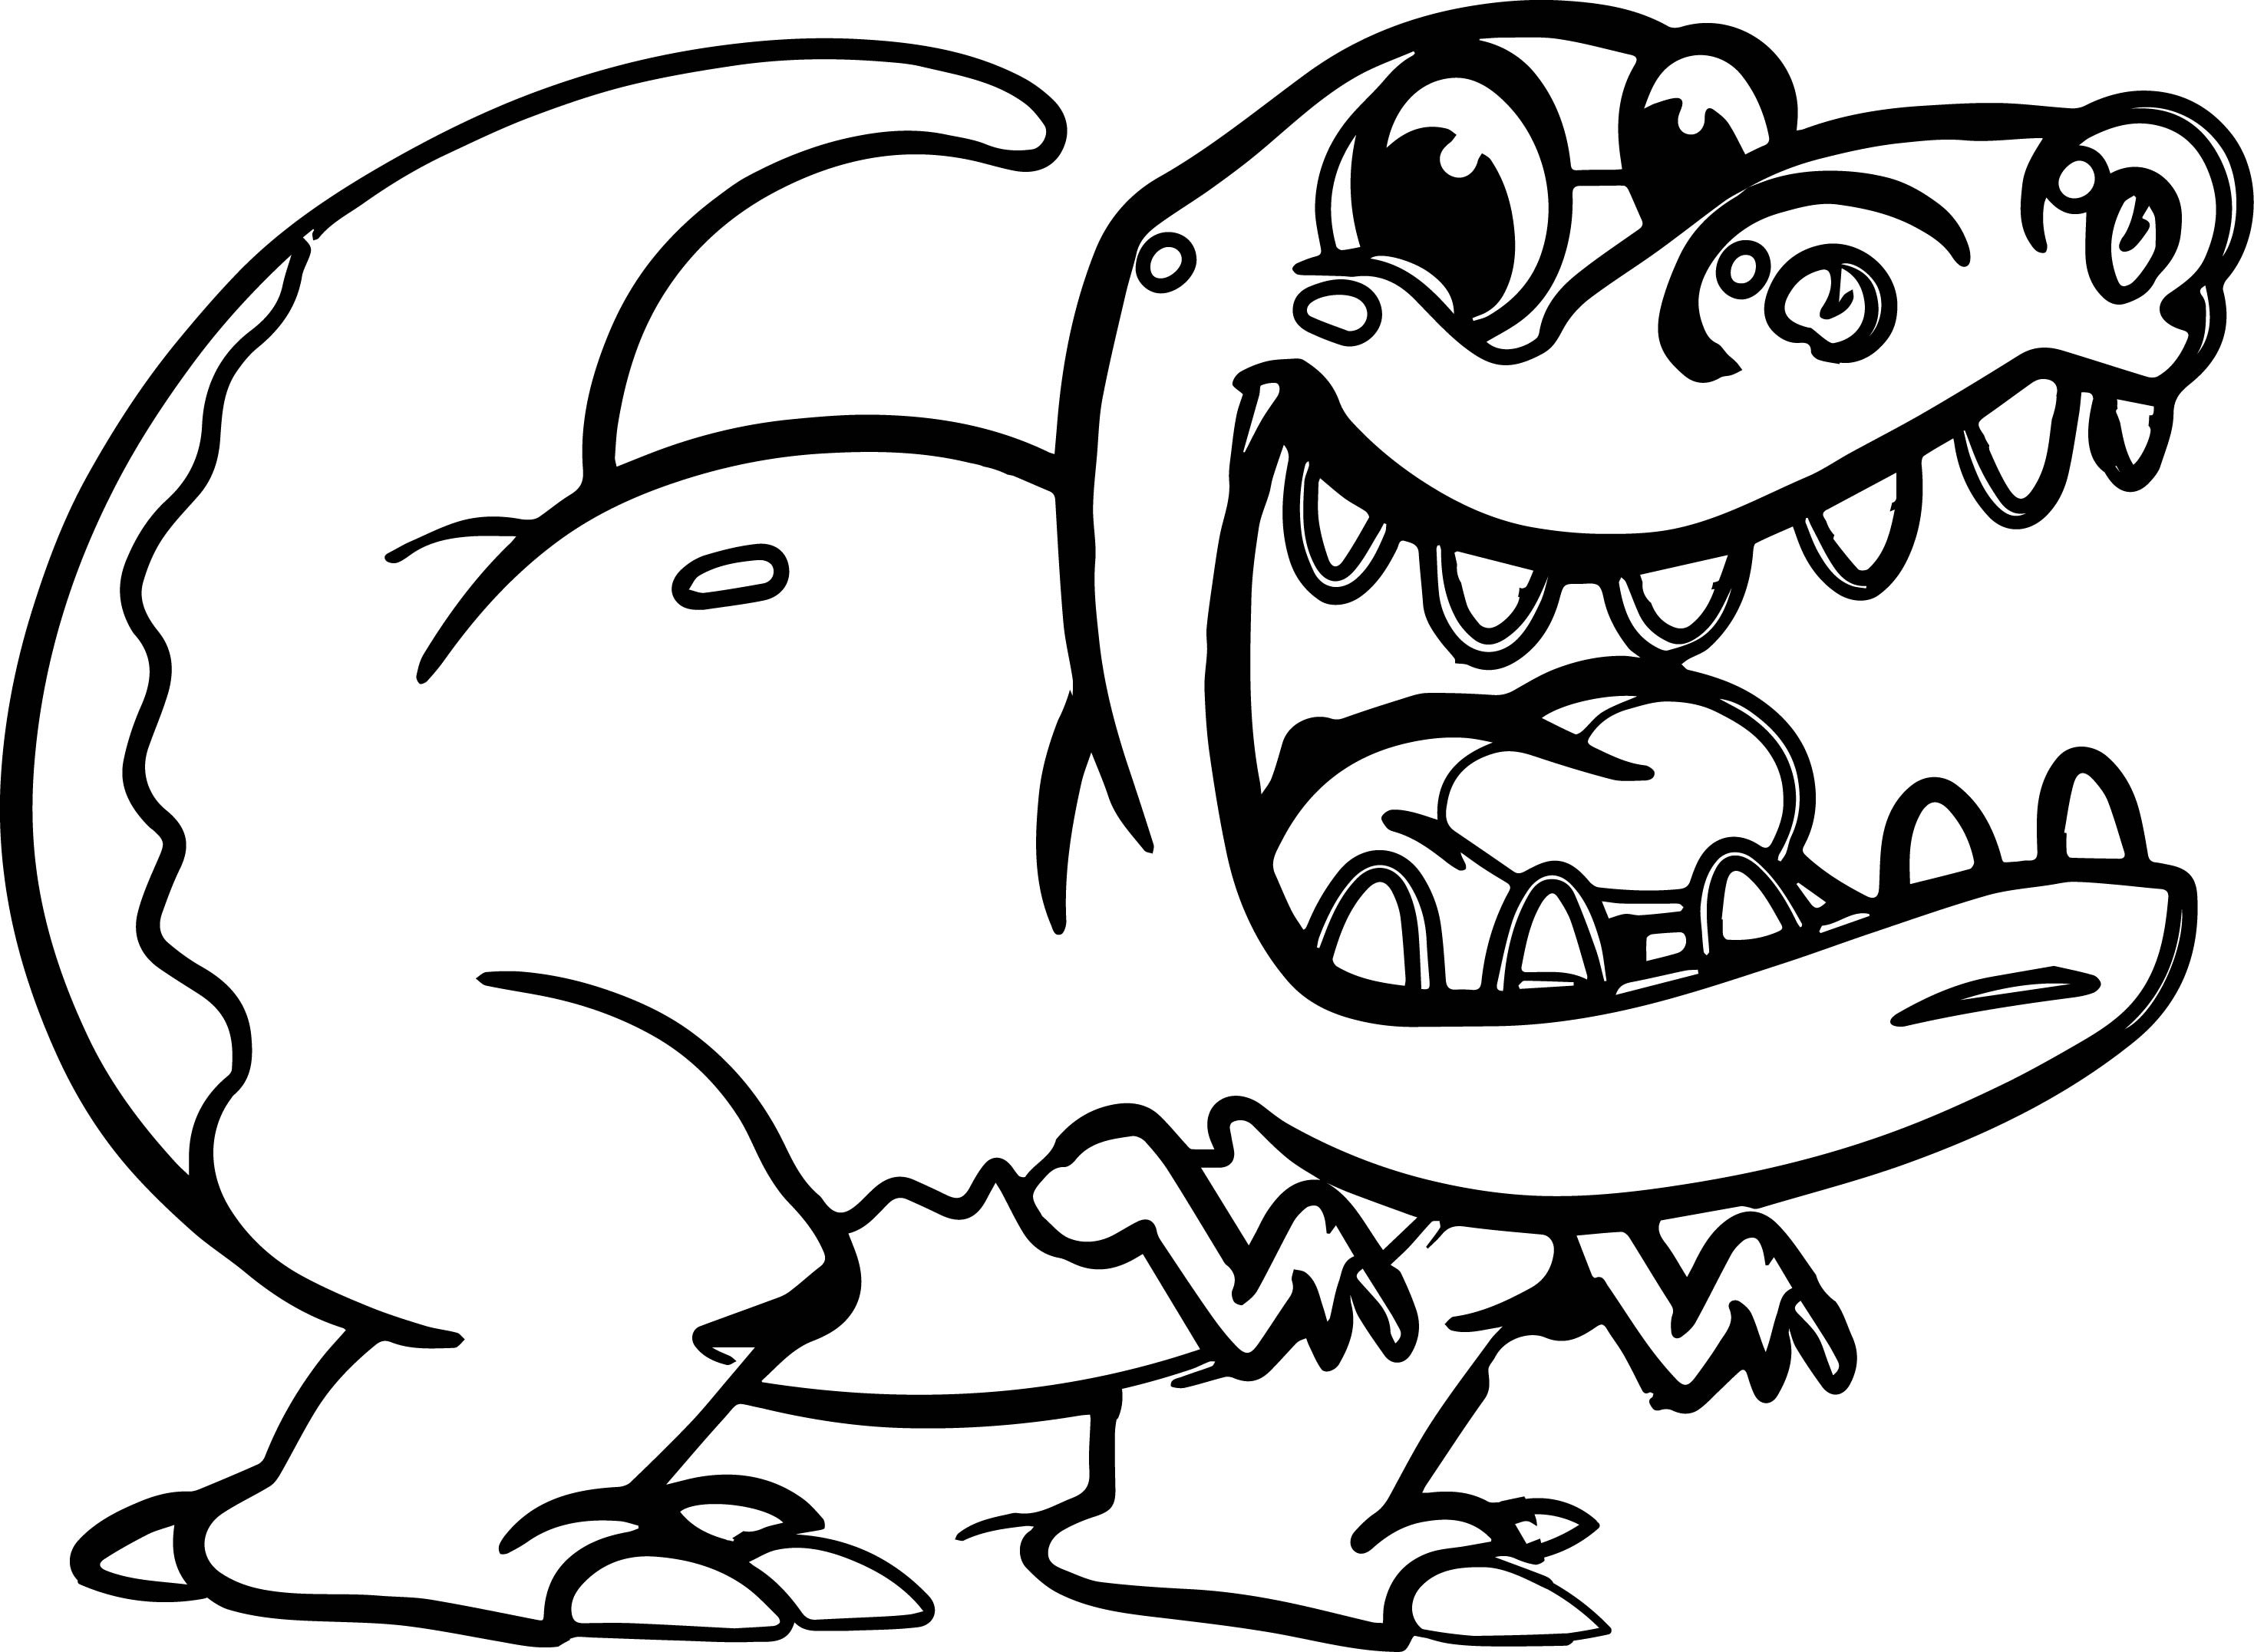 Cute Dinosaur Coloring Pages T Rex See More Ideas About Dinosaur Coloring Pages Dinosaur